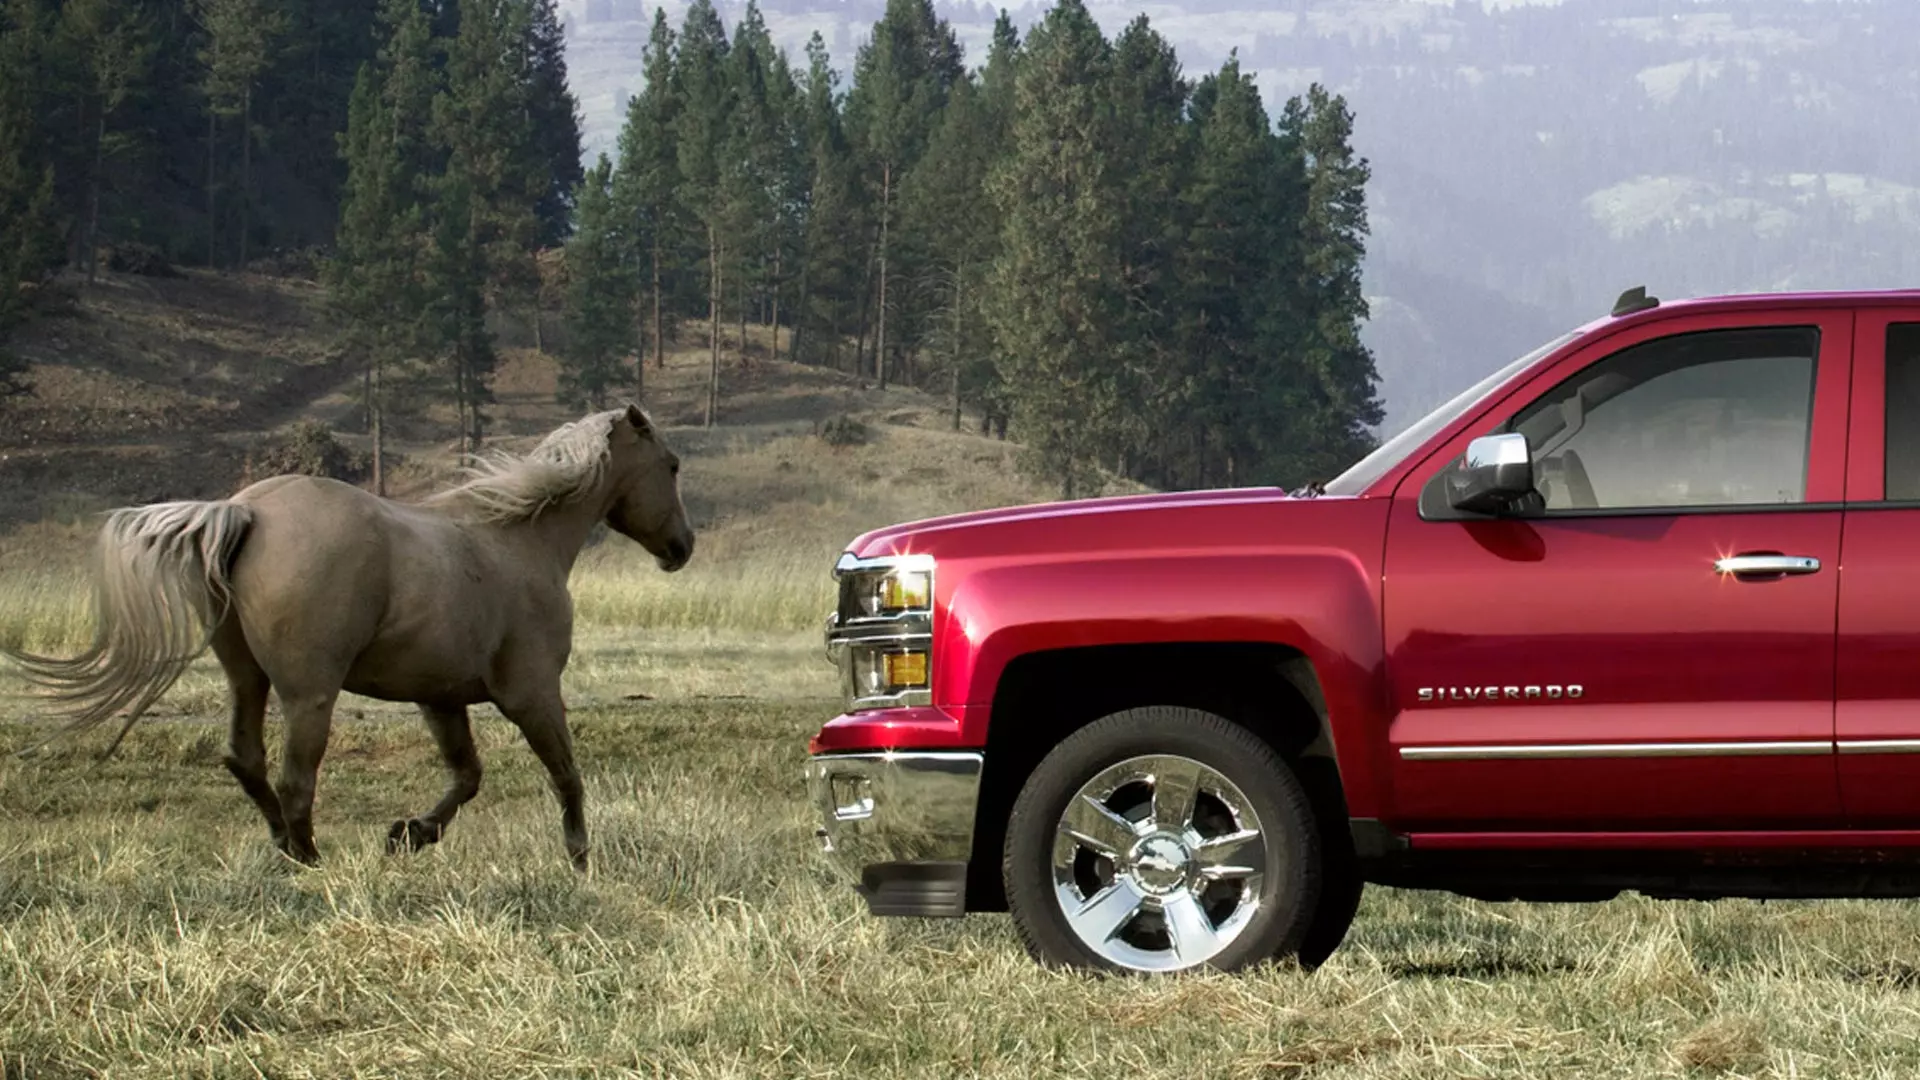 Why the 2014 Chevy Silverado Looks So Much Better Than Every Other Modern Truck